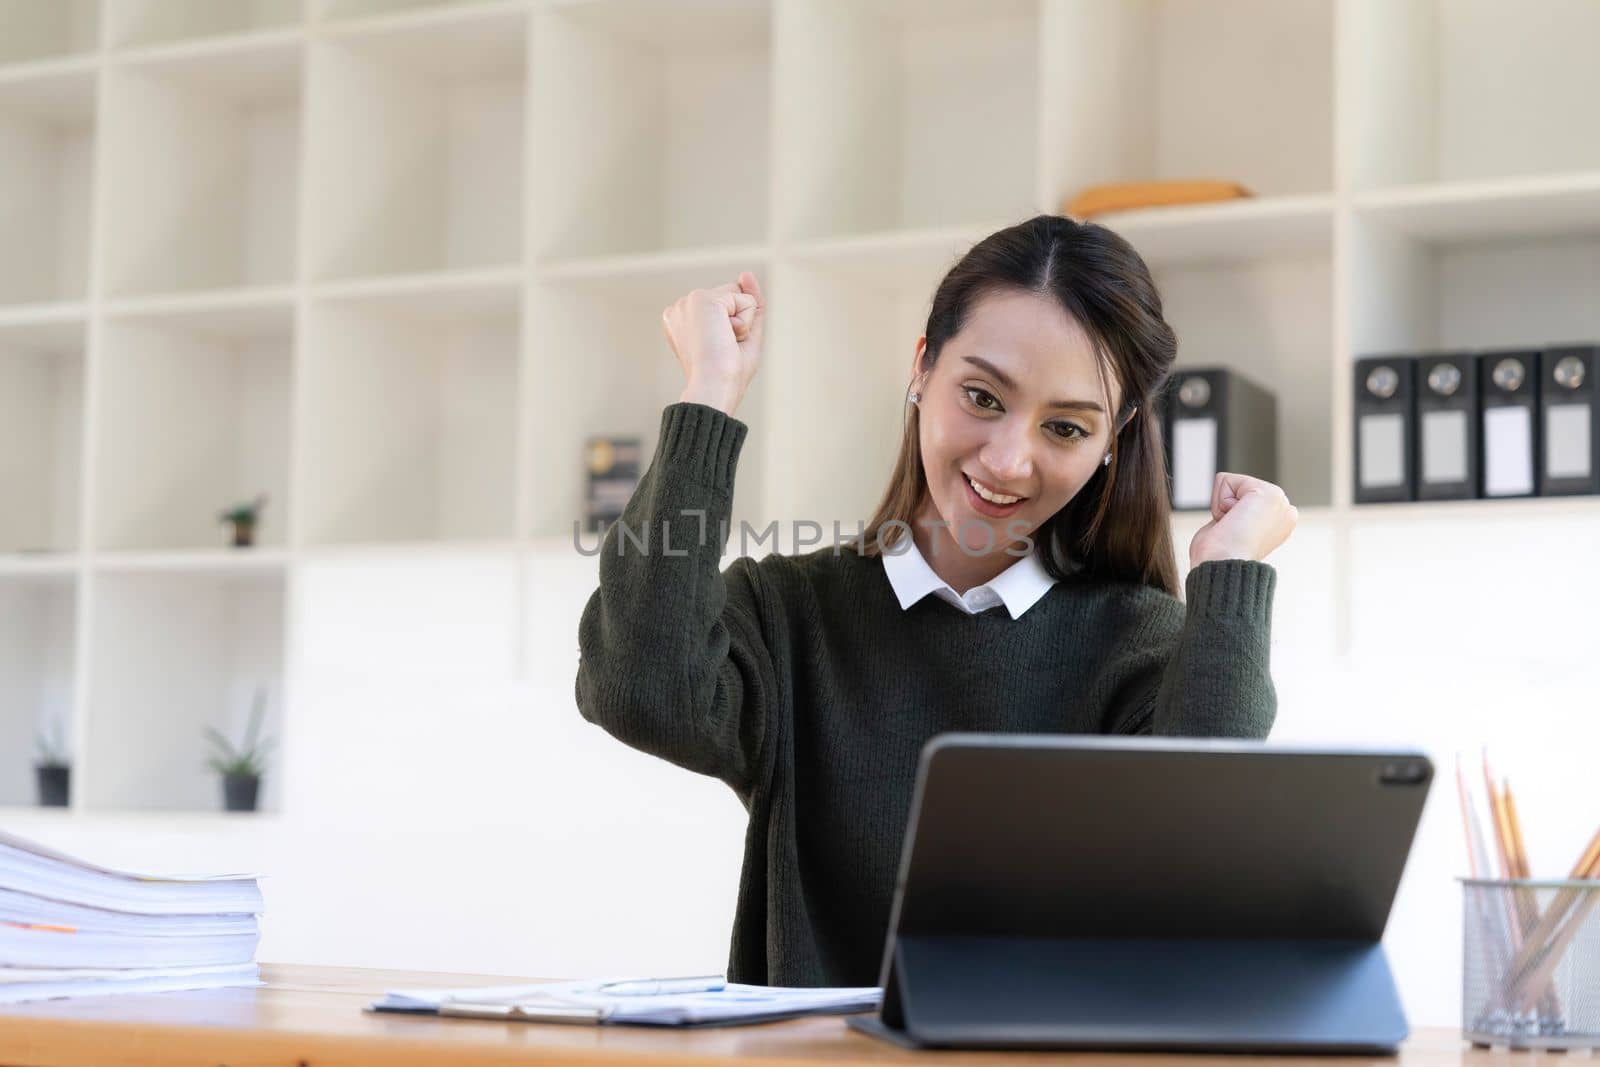 Pretty Asian businesswoman sitting on a laptop And the work came out successfully and the goal was achieved, happy and satisfied with her